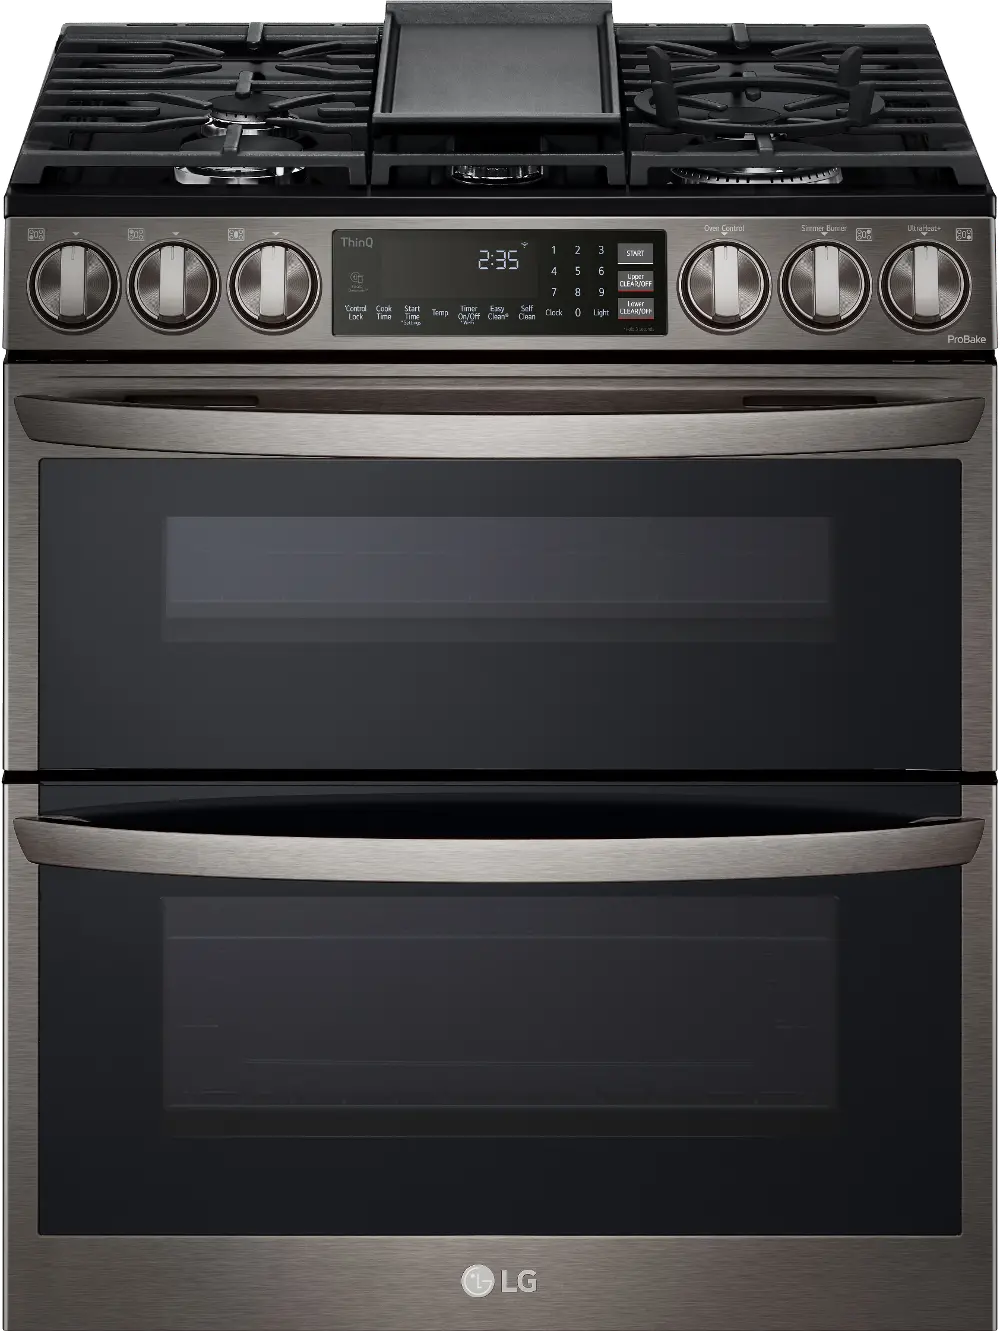 LTGL6937D LG 6.9 cu ft Double Oven Gas Range with InstaView - Black Stainless Steel-1